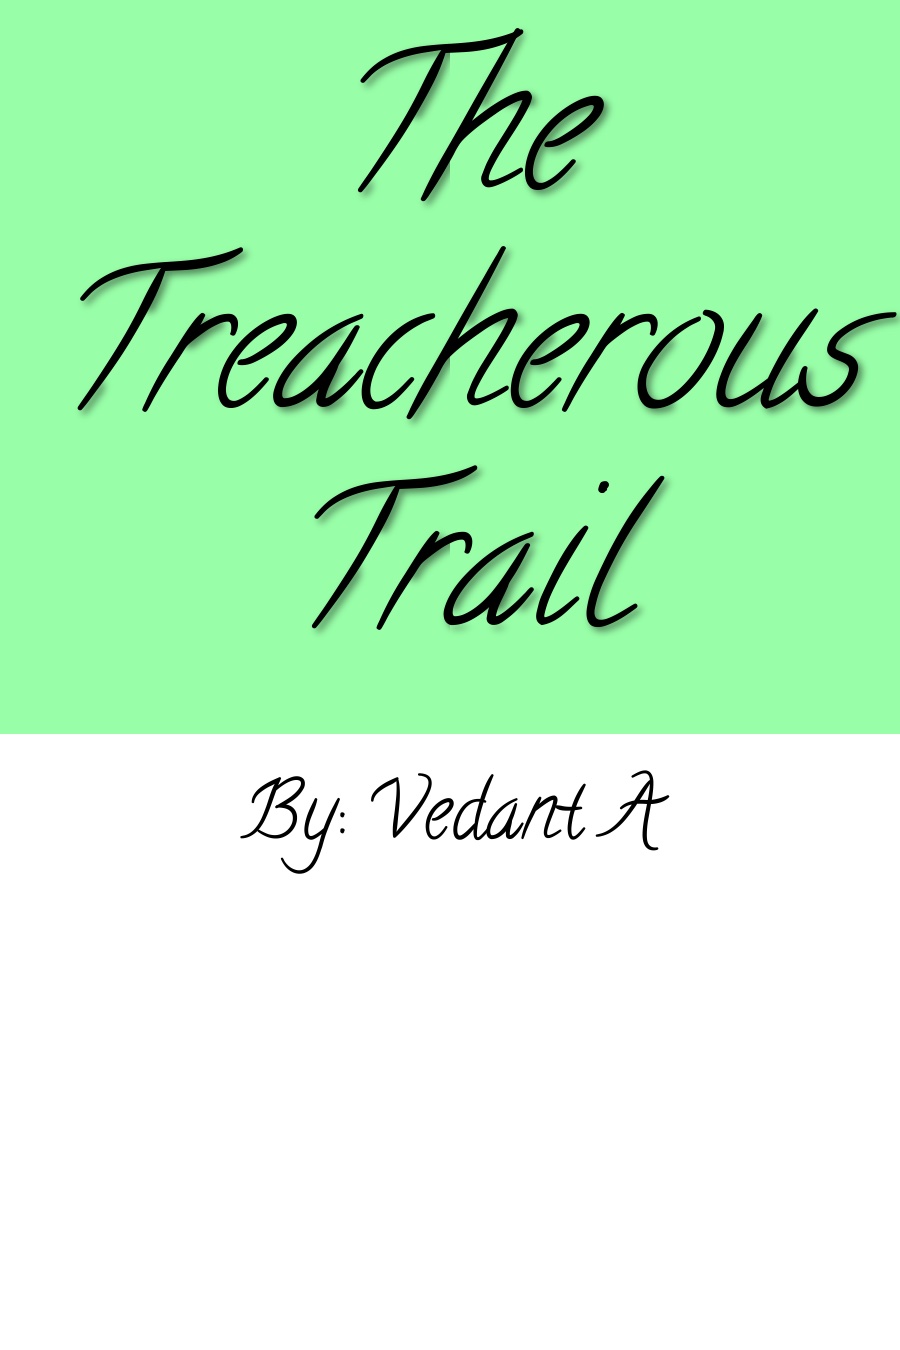 The Trecherous Trail by Vedant A